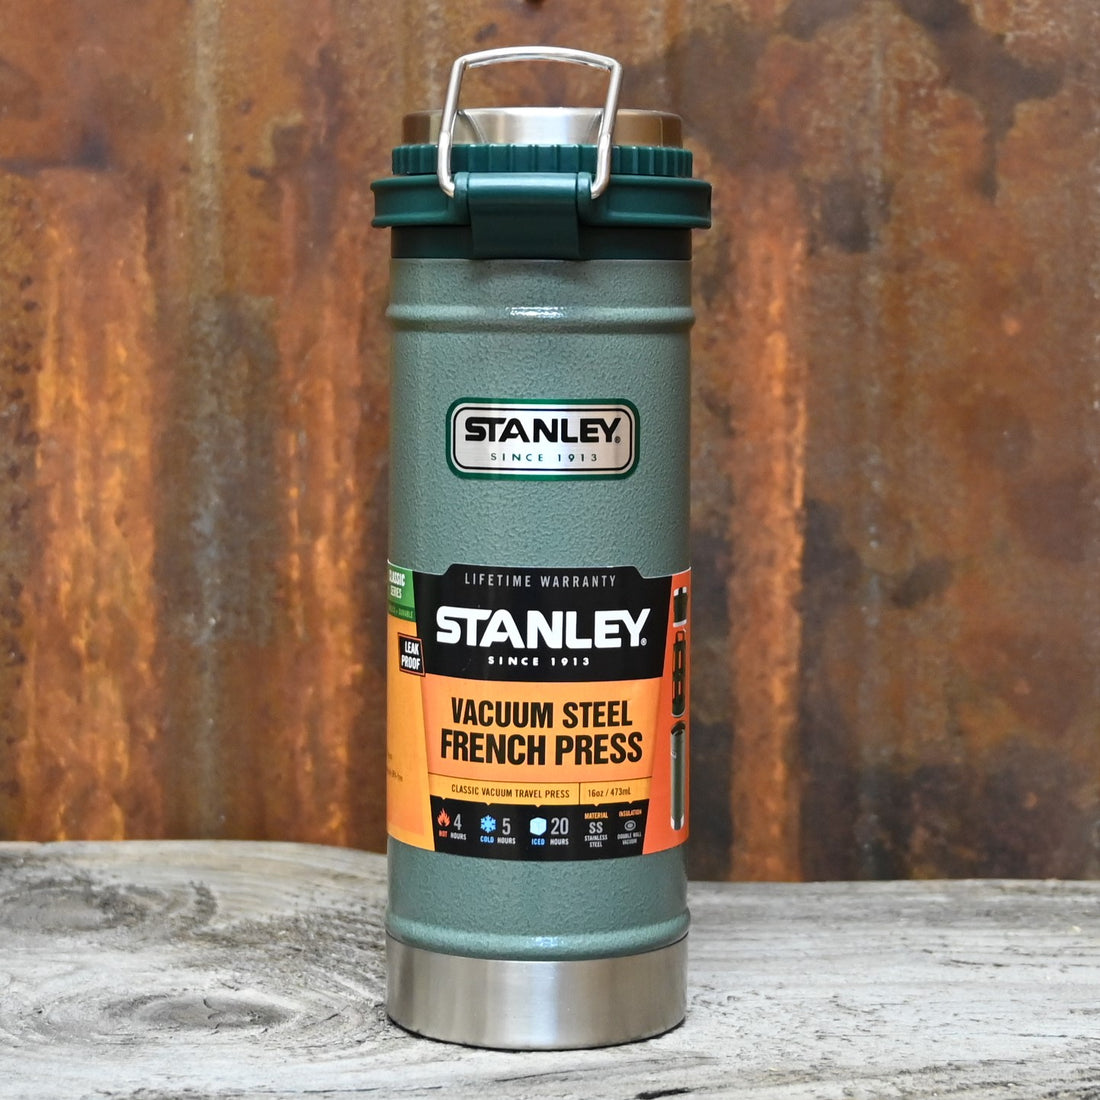 Stanley Classic Travel Press In Hammertone Green view of french press